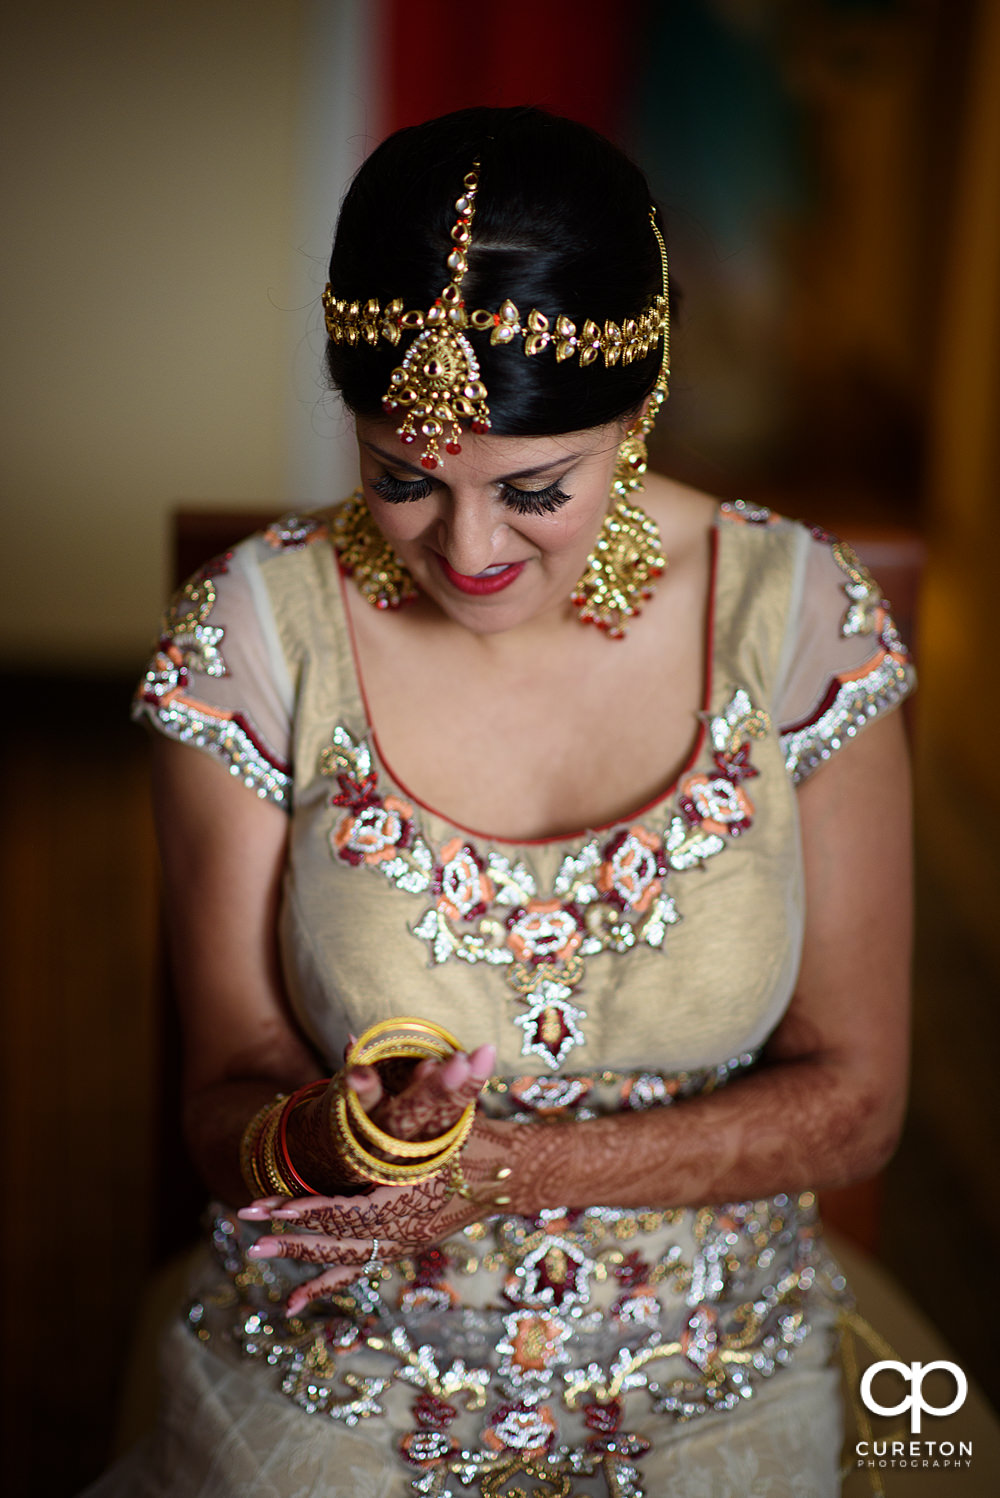 Indian bride getting ready for her wedding.